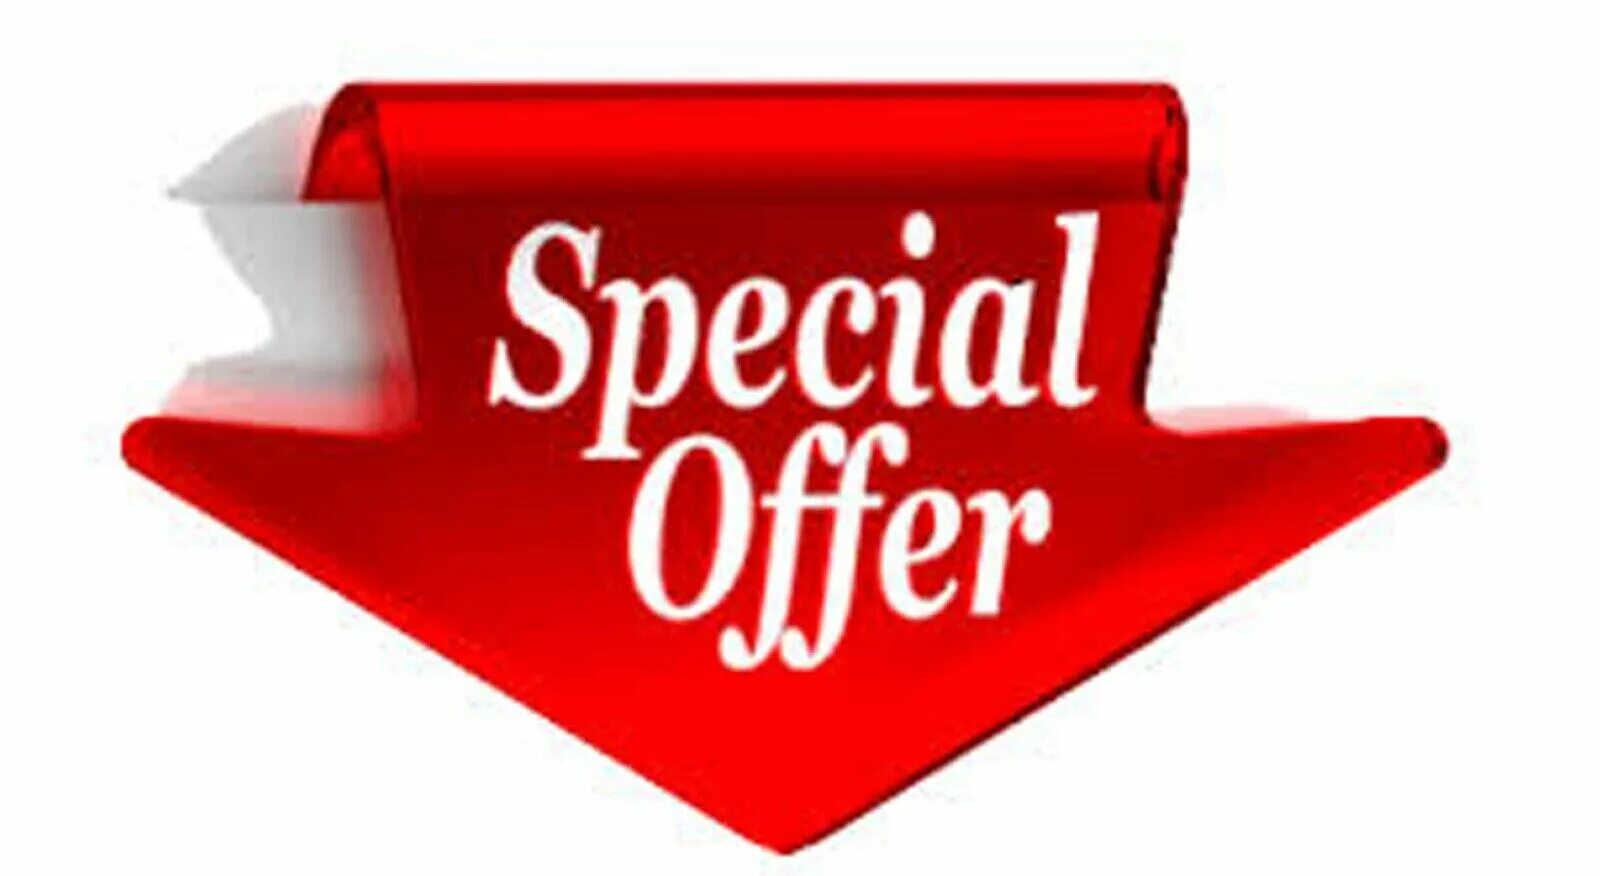 Great offers. Special offer. Special offer на прозрачном фоне. Special offer discount. Offer лого.